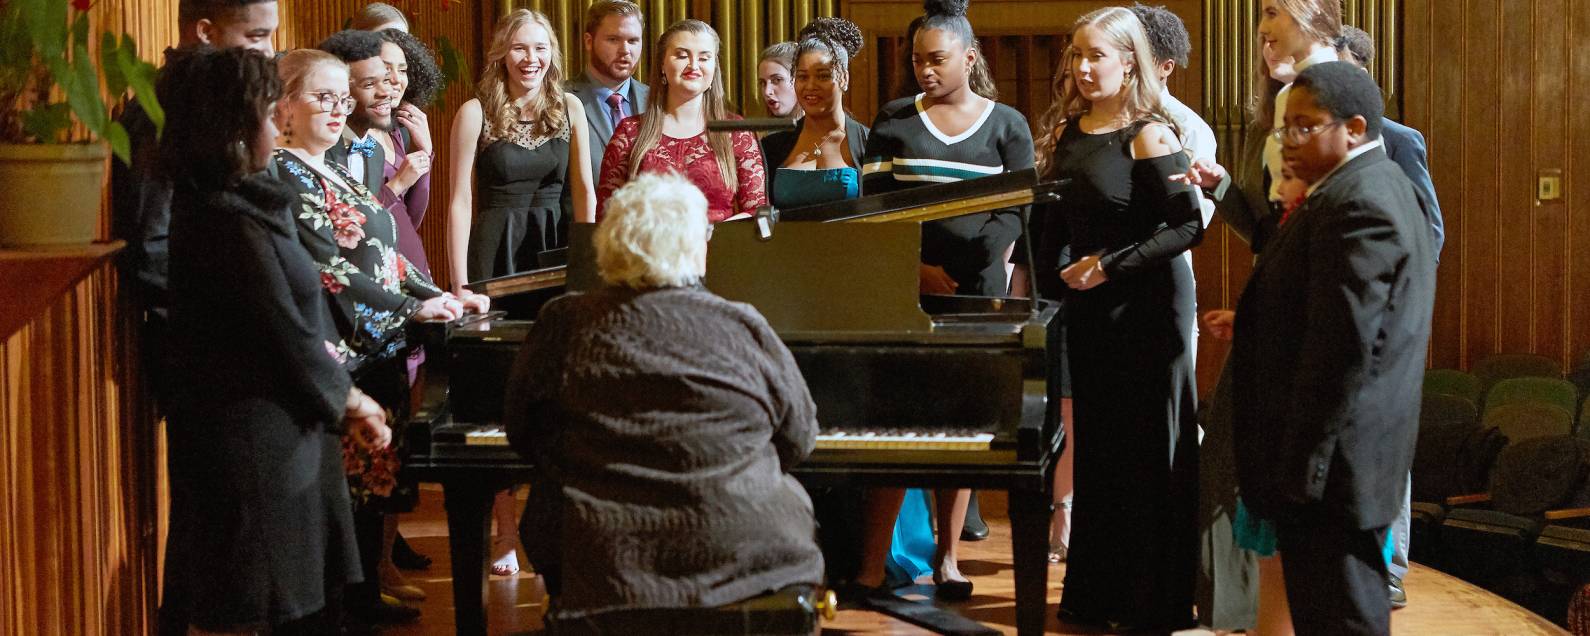 A group of young Artists-in-Training gather around a piano at a recital.